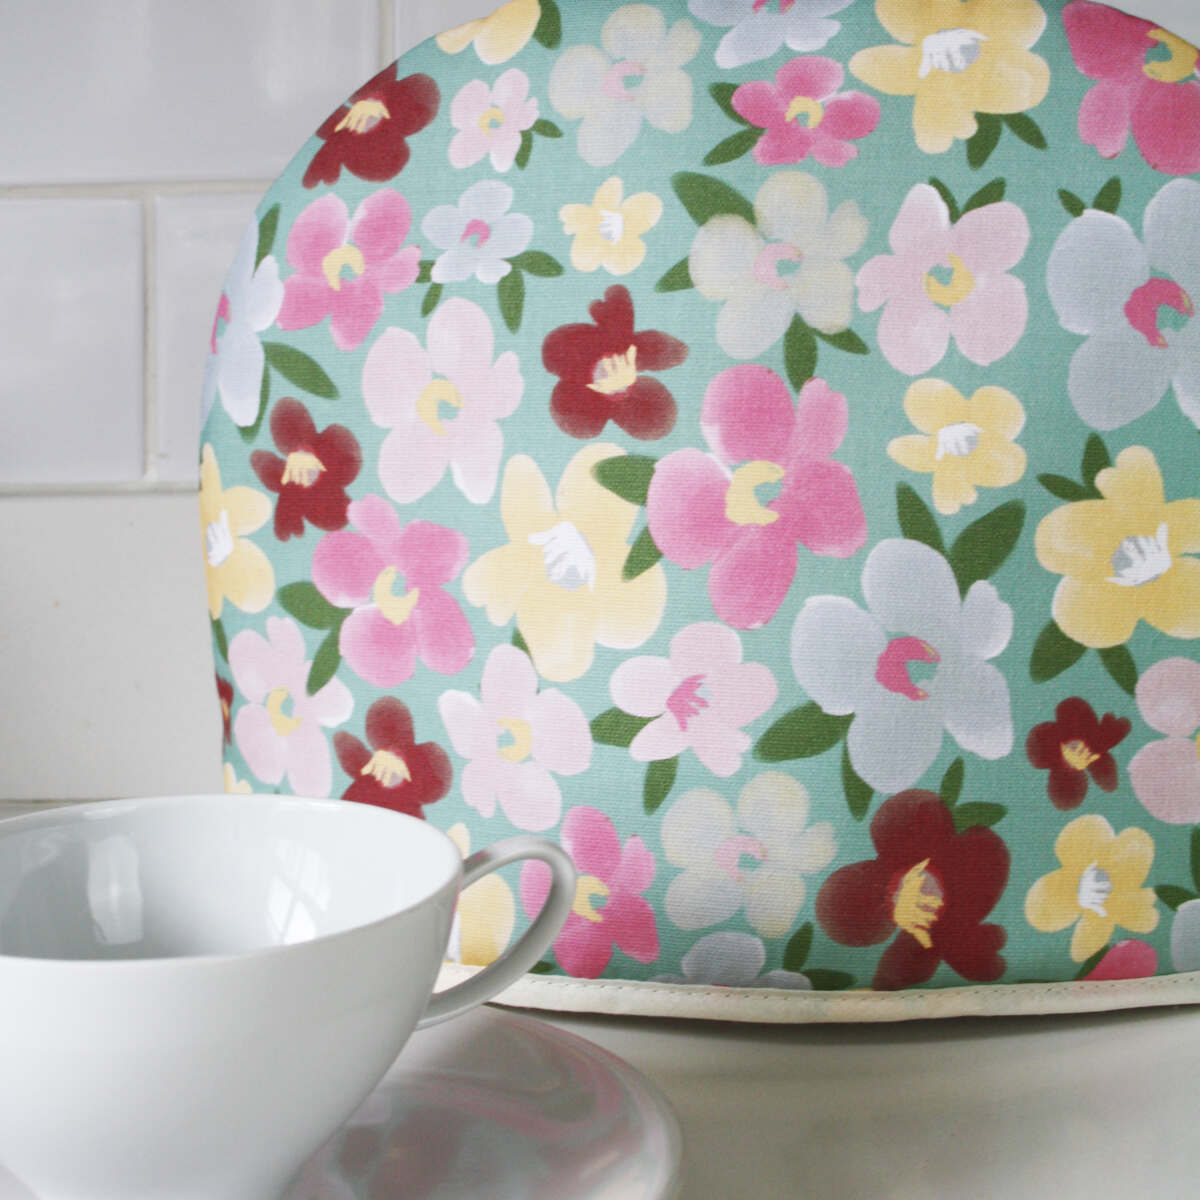 Tea Cosy "All In Blooms"